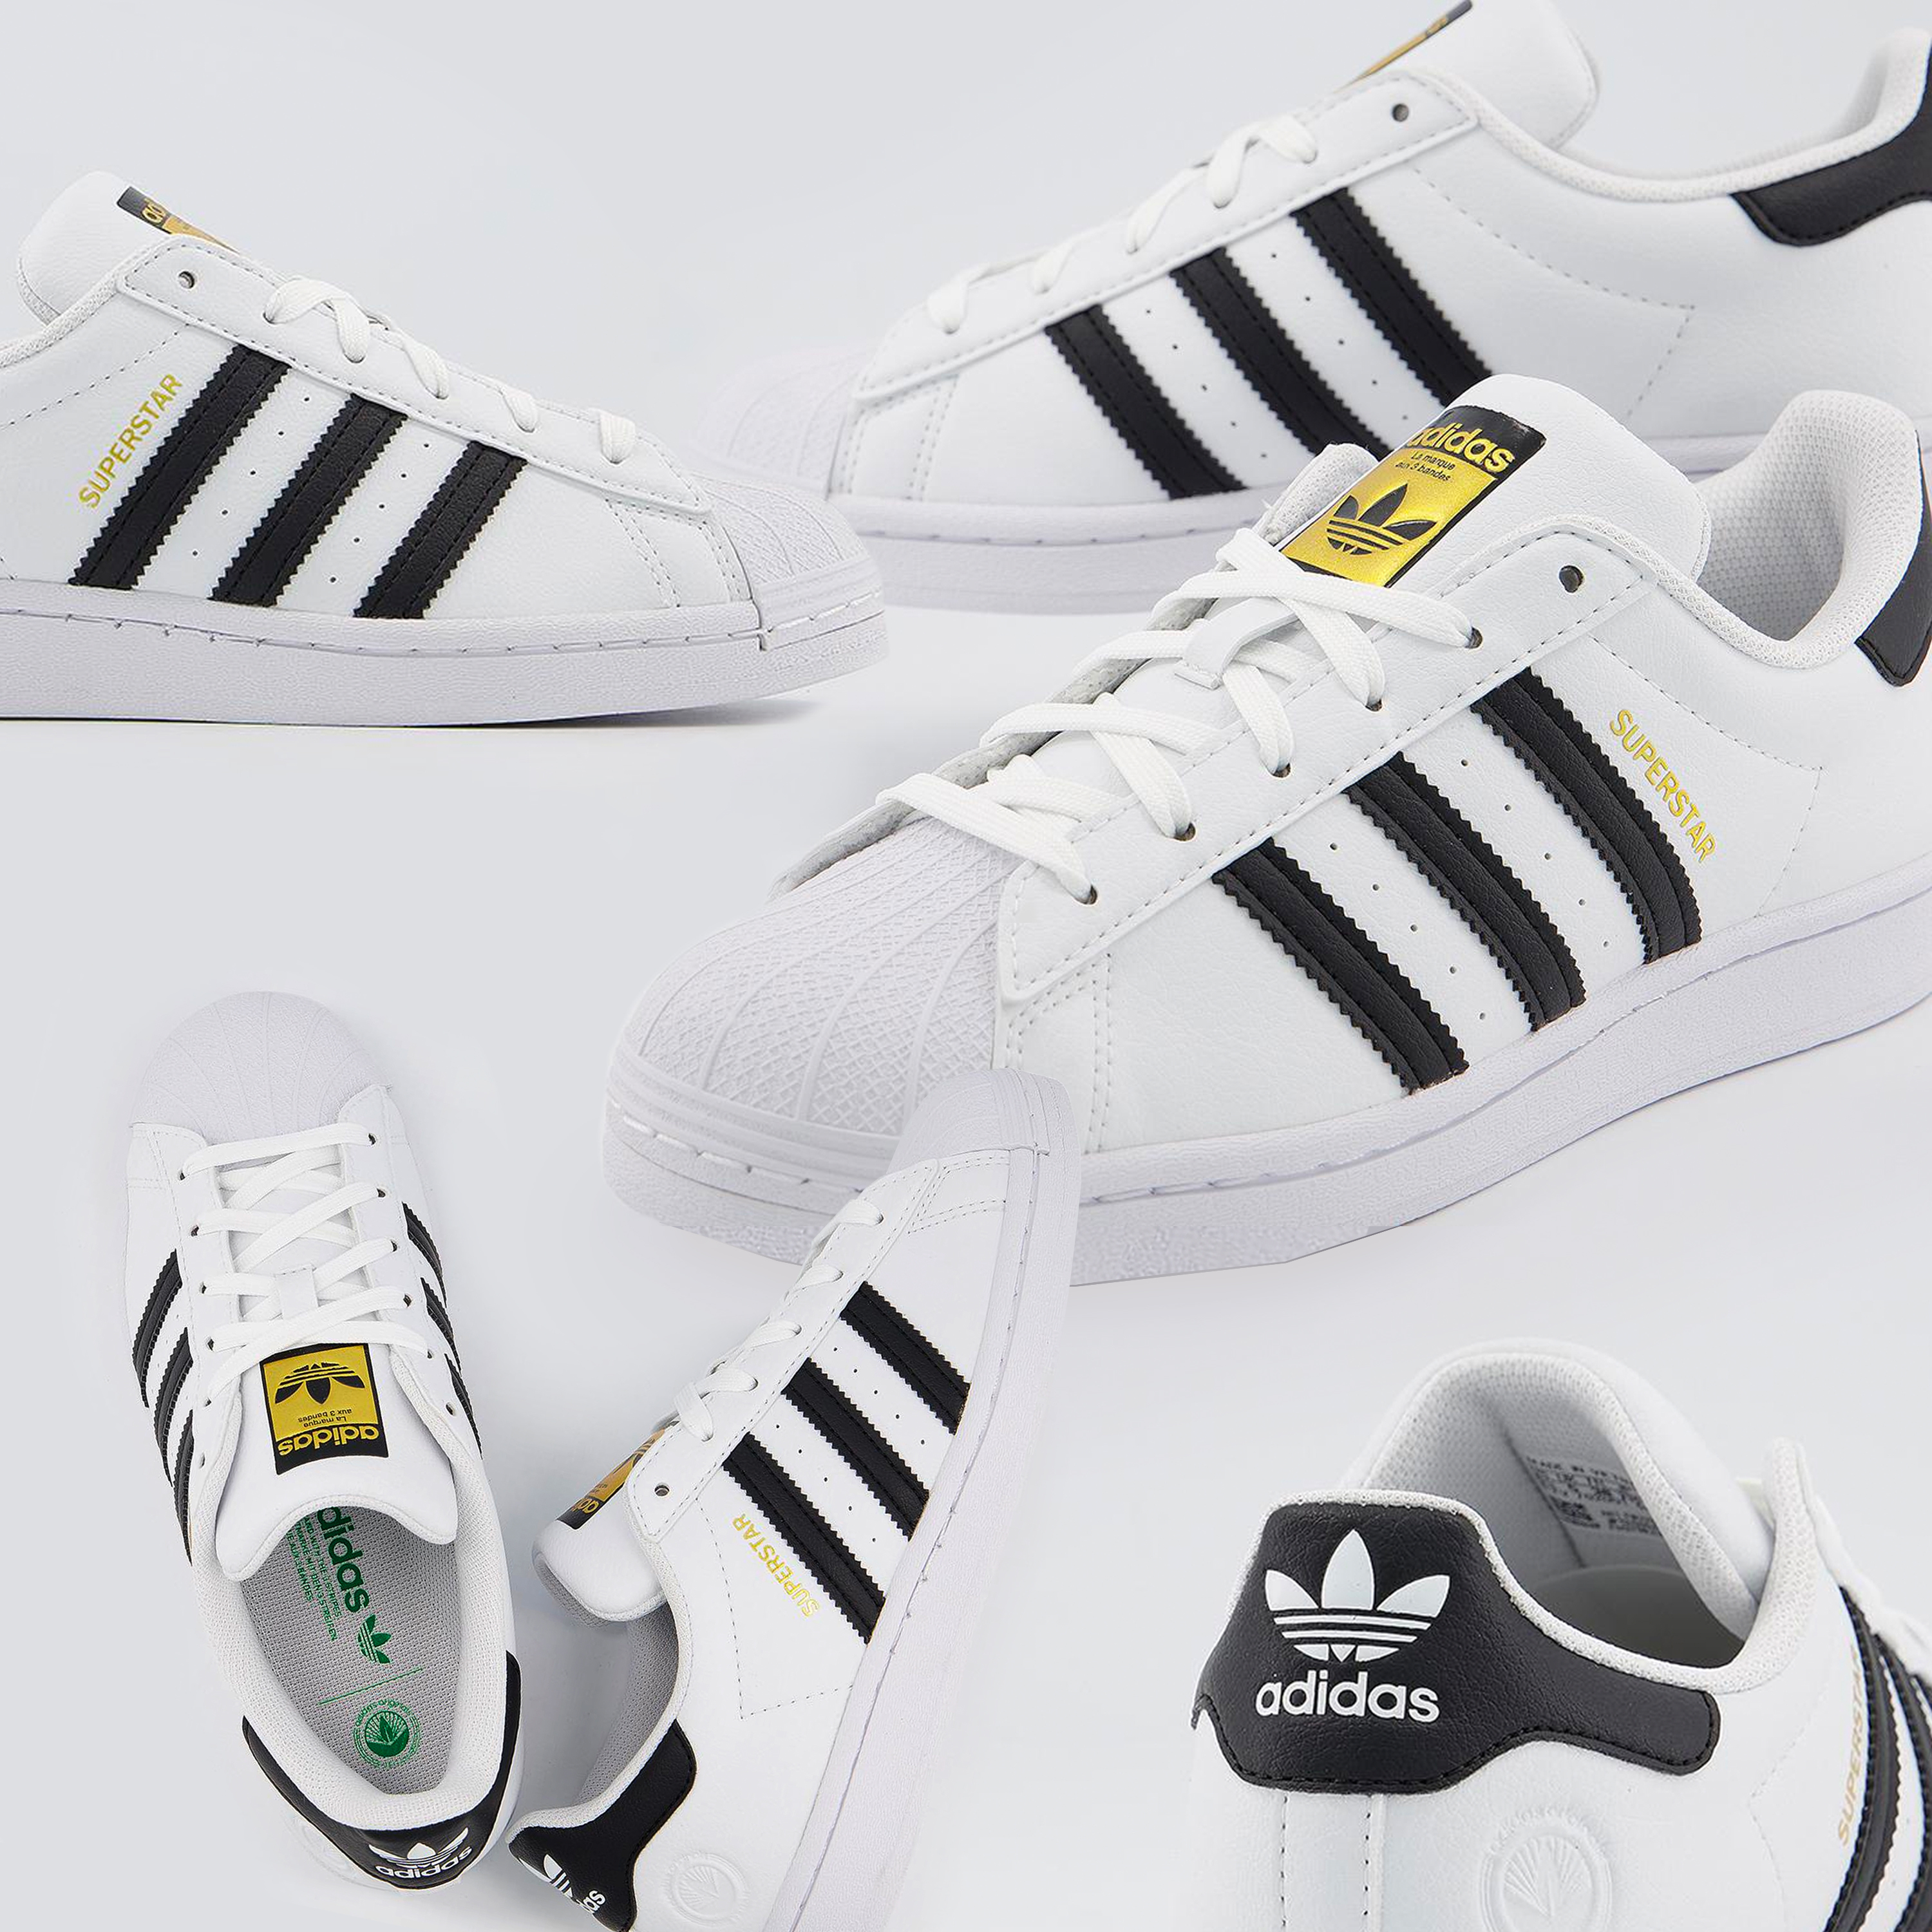 adidas superstar shoes material